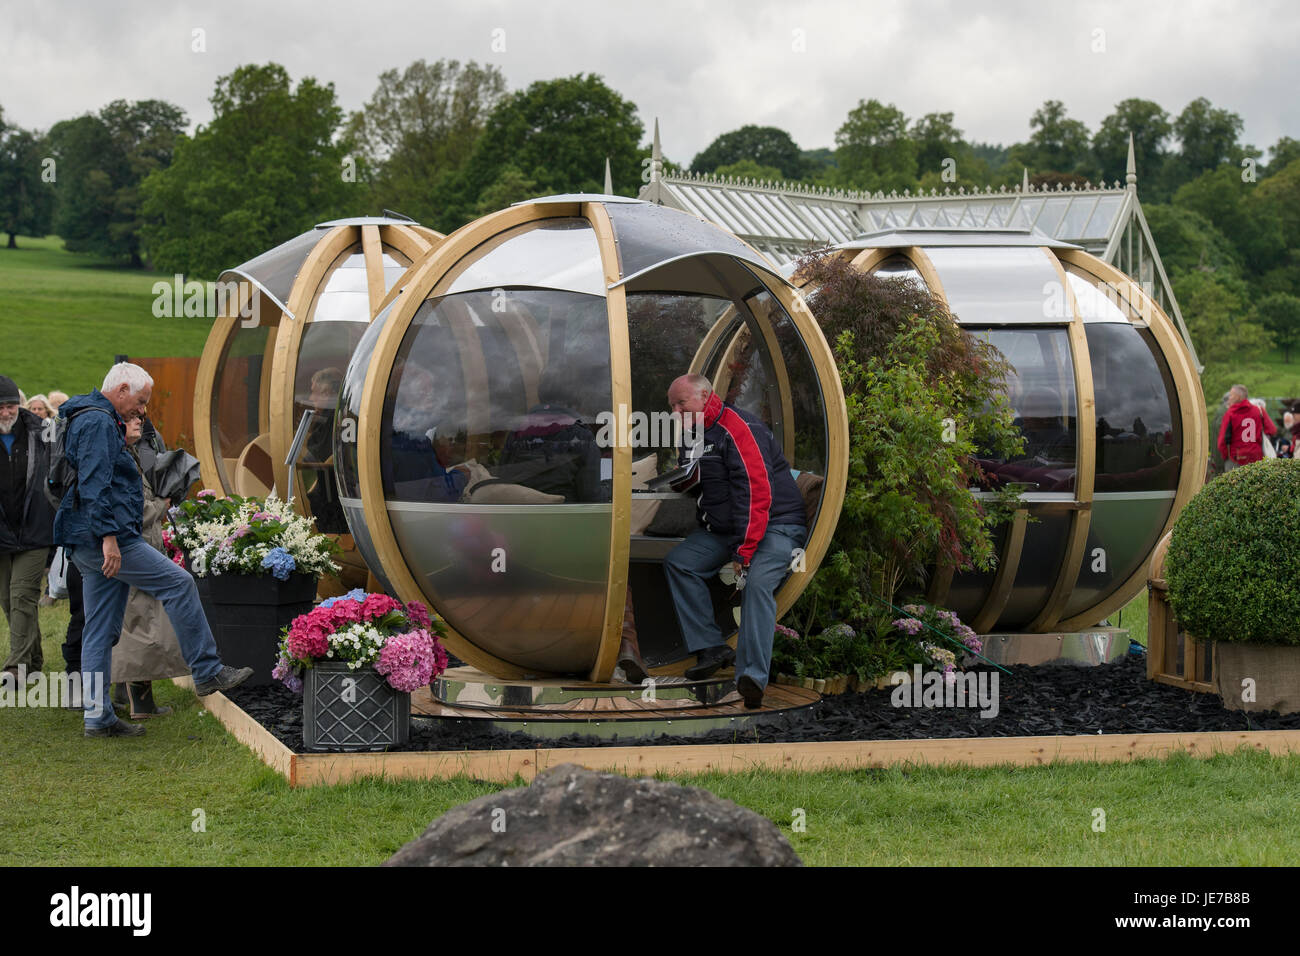 People visiting RHS Chatsworth Flower Show, Chatsworth House, Derbyshire, England, UK, enjoy looking round & trying out, modern spherical garden pods. Stock Photo